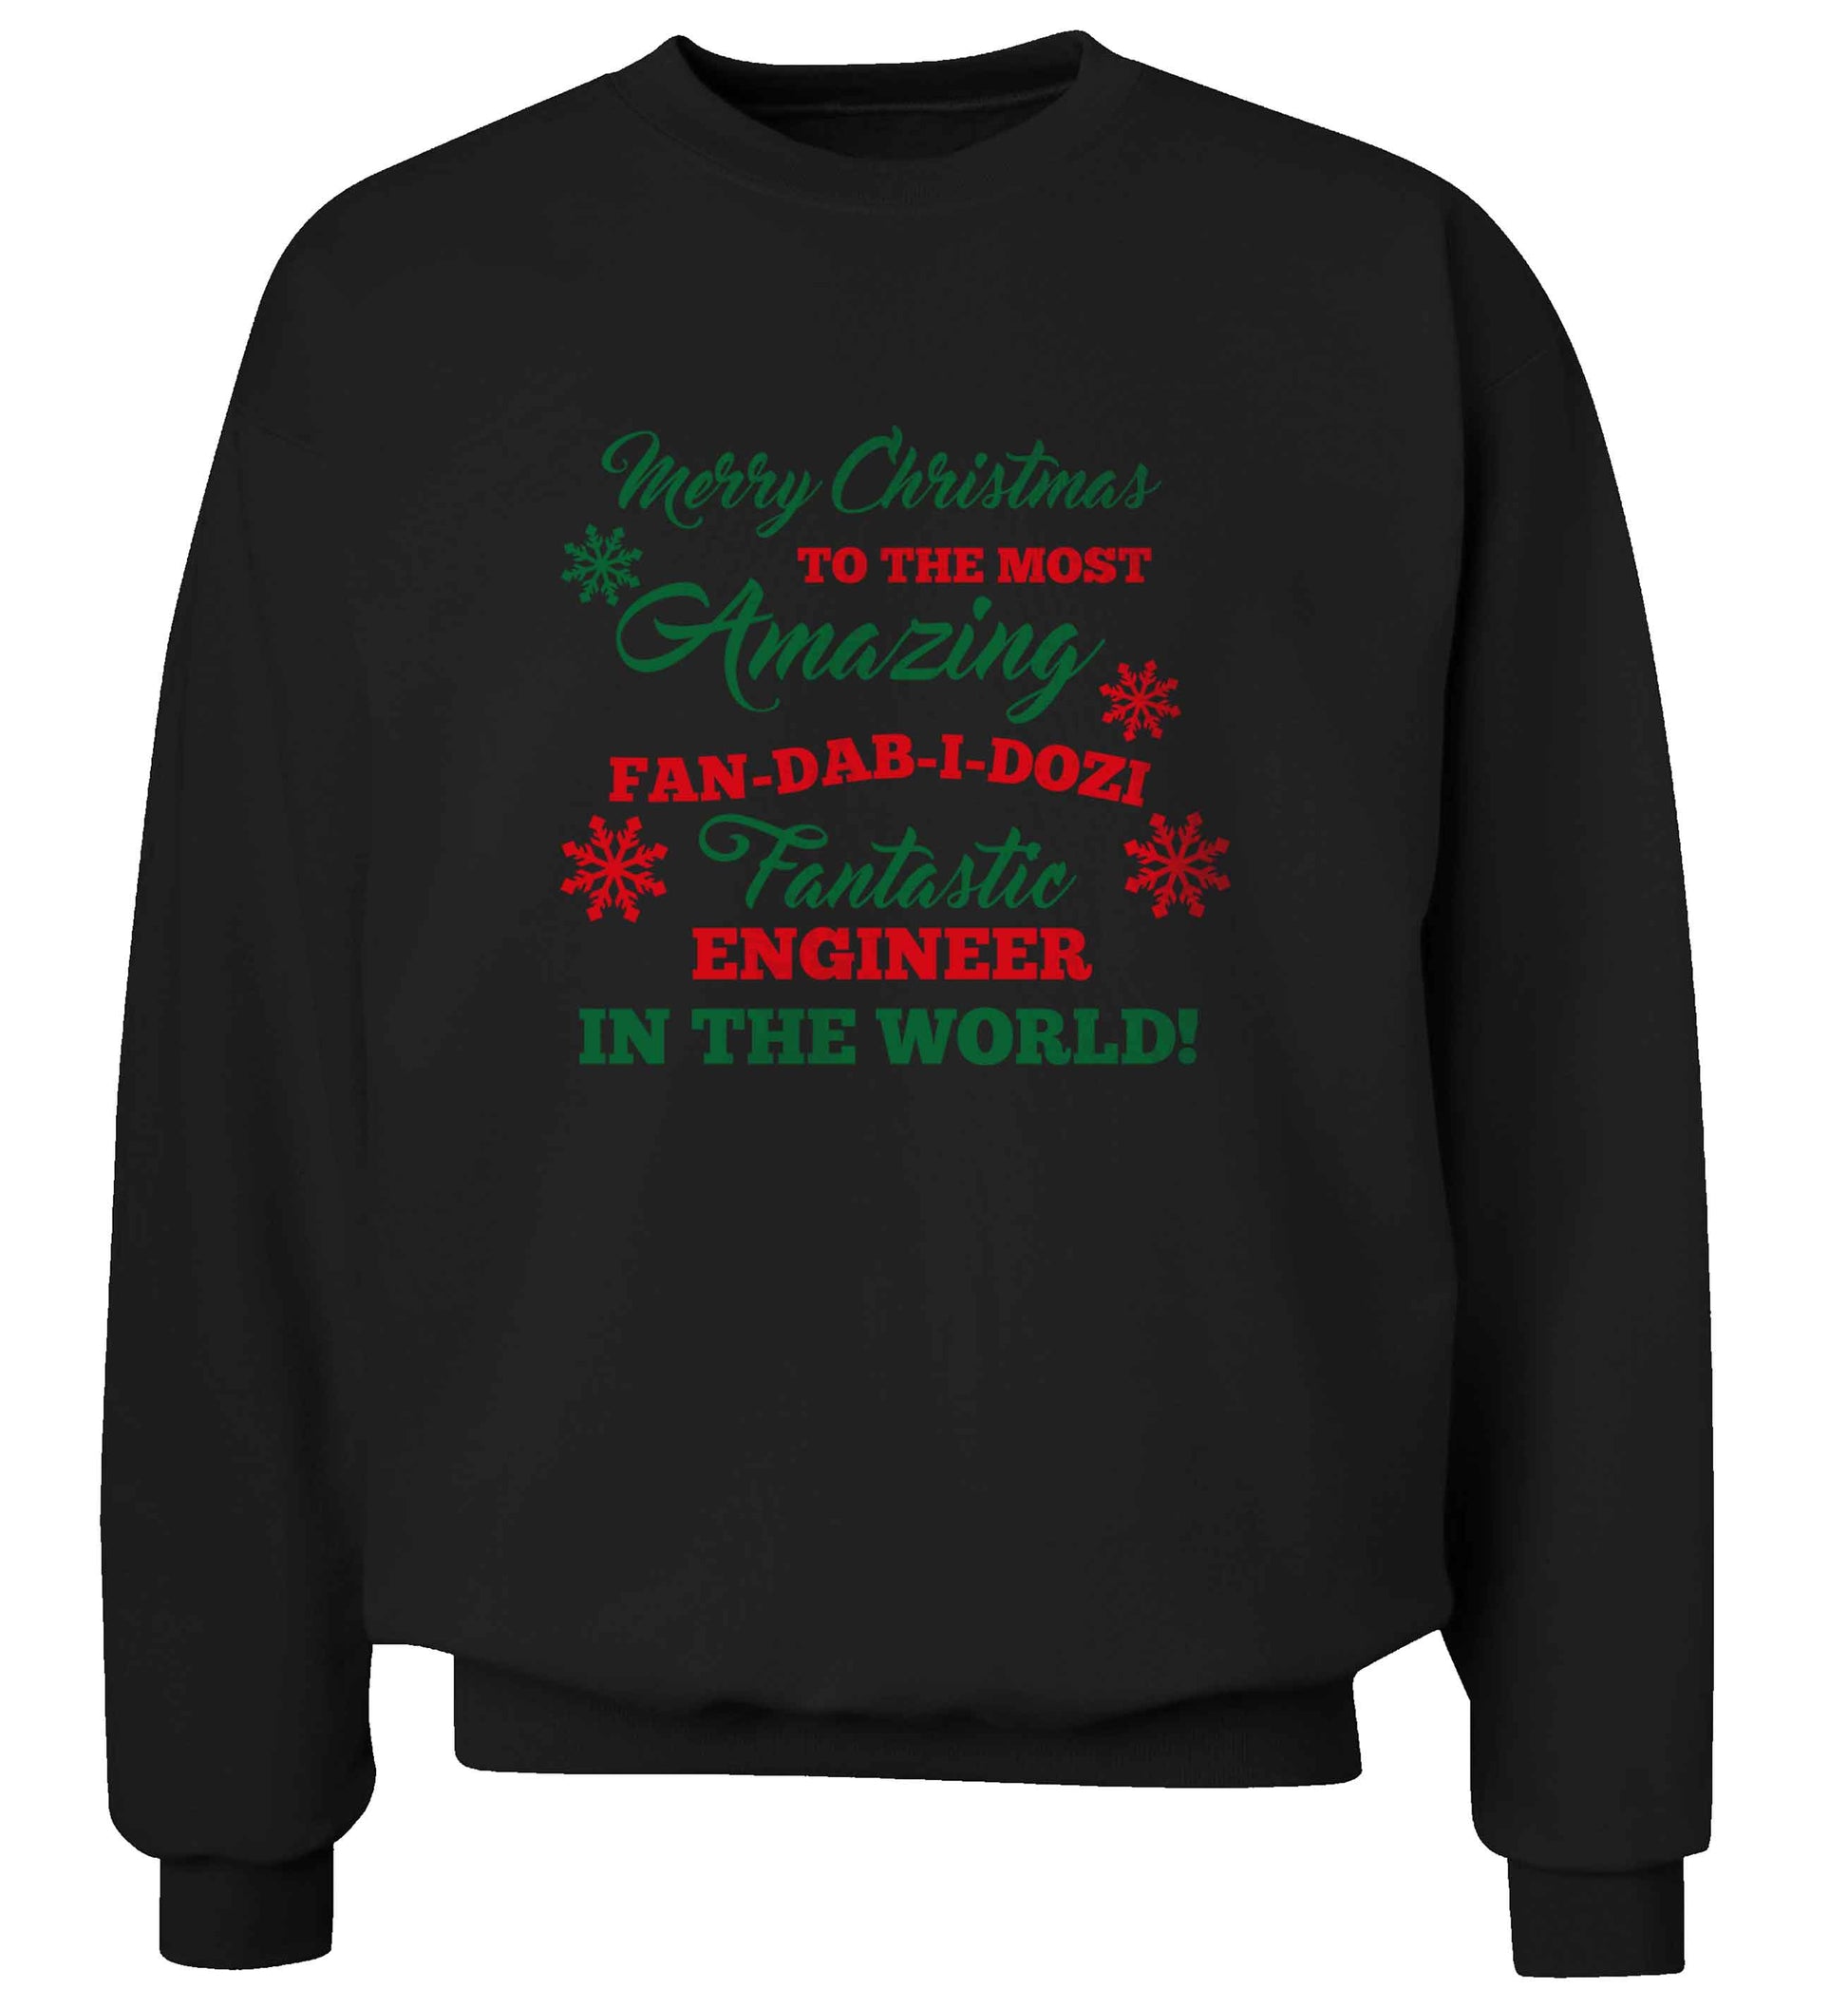 Merry Christmas to the most amazing engineer in the world! adult's unisex black sweater 2XL